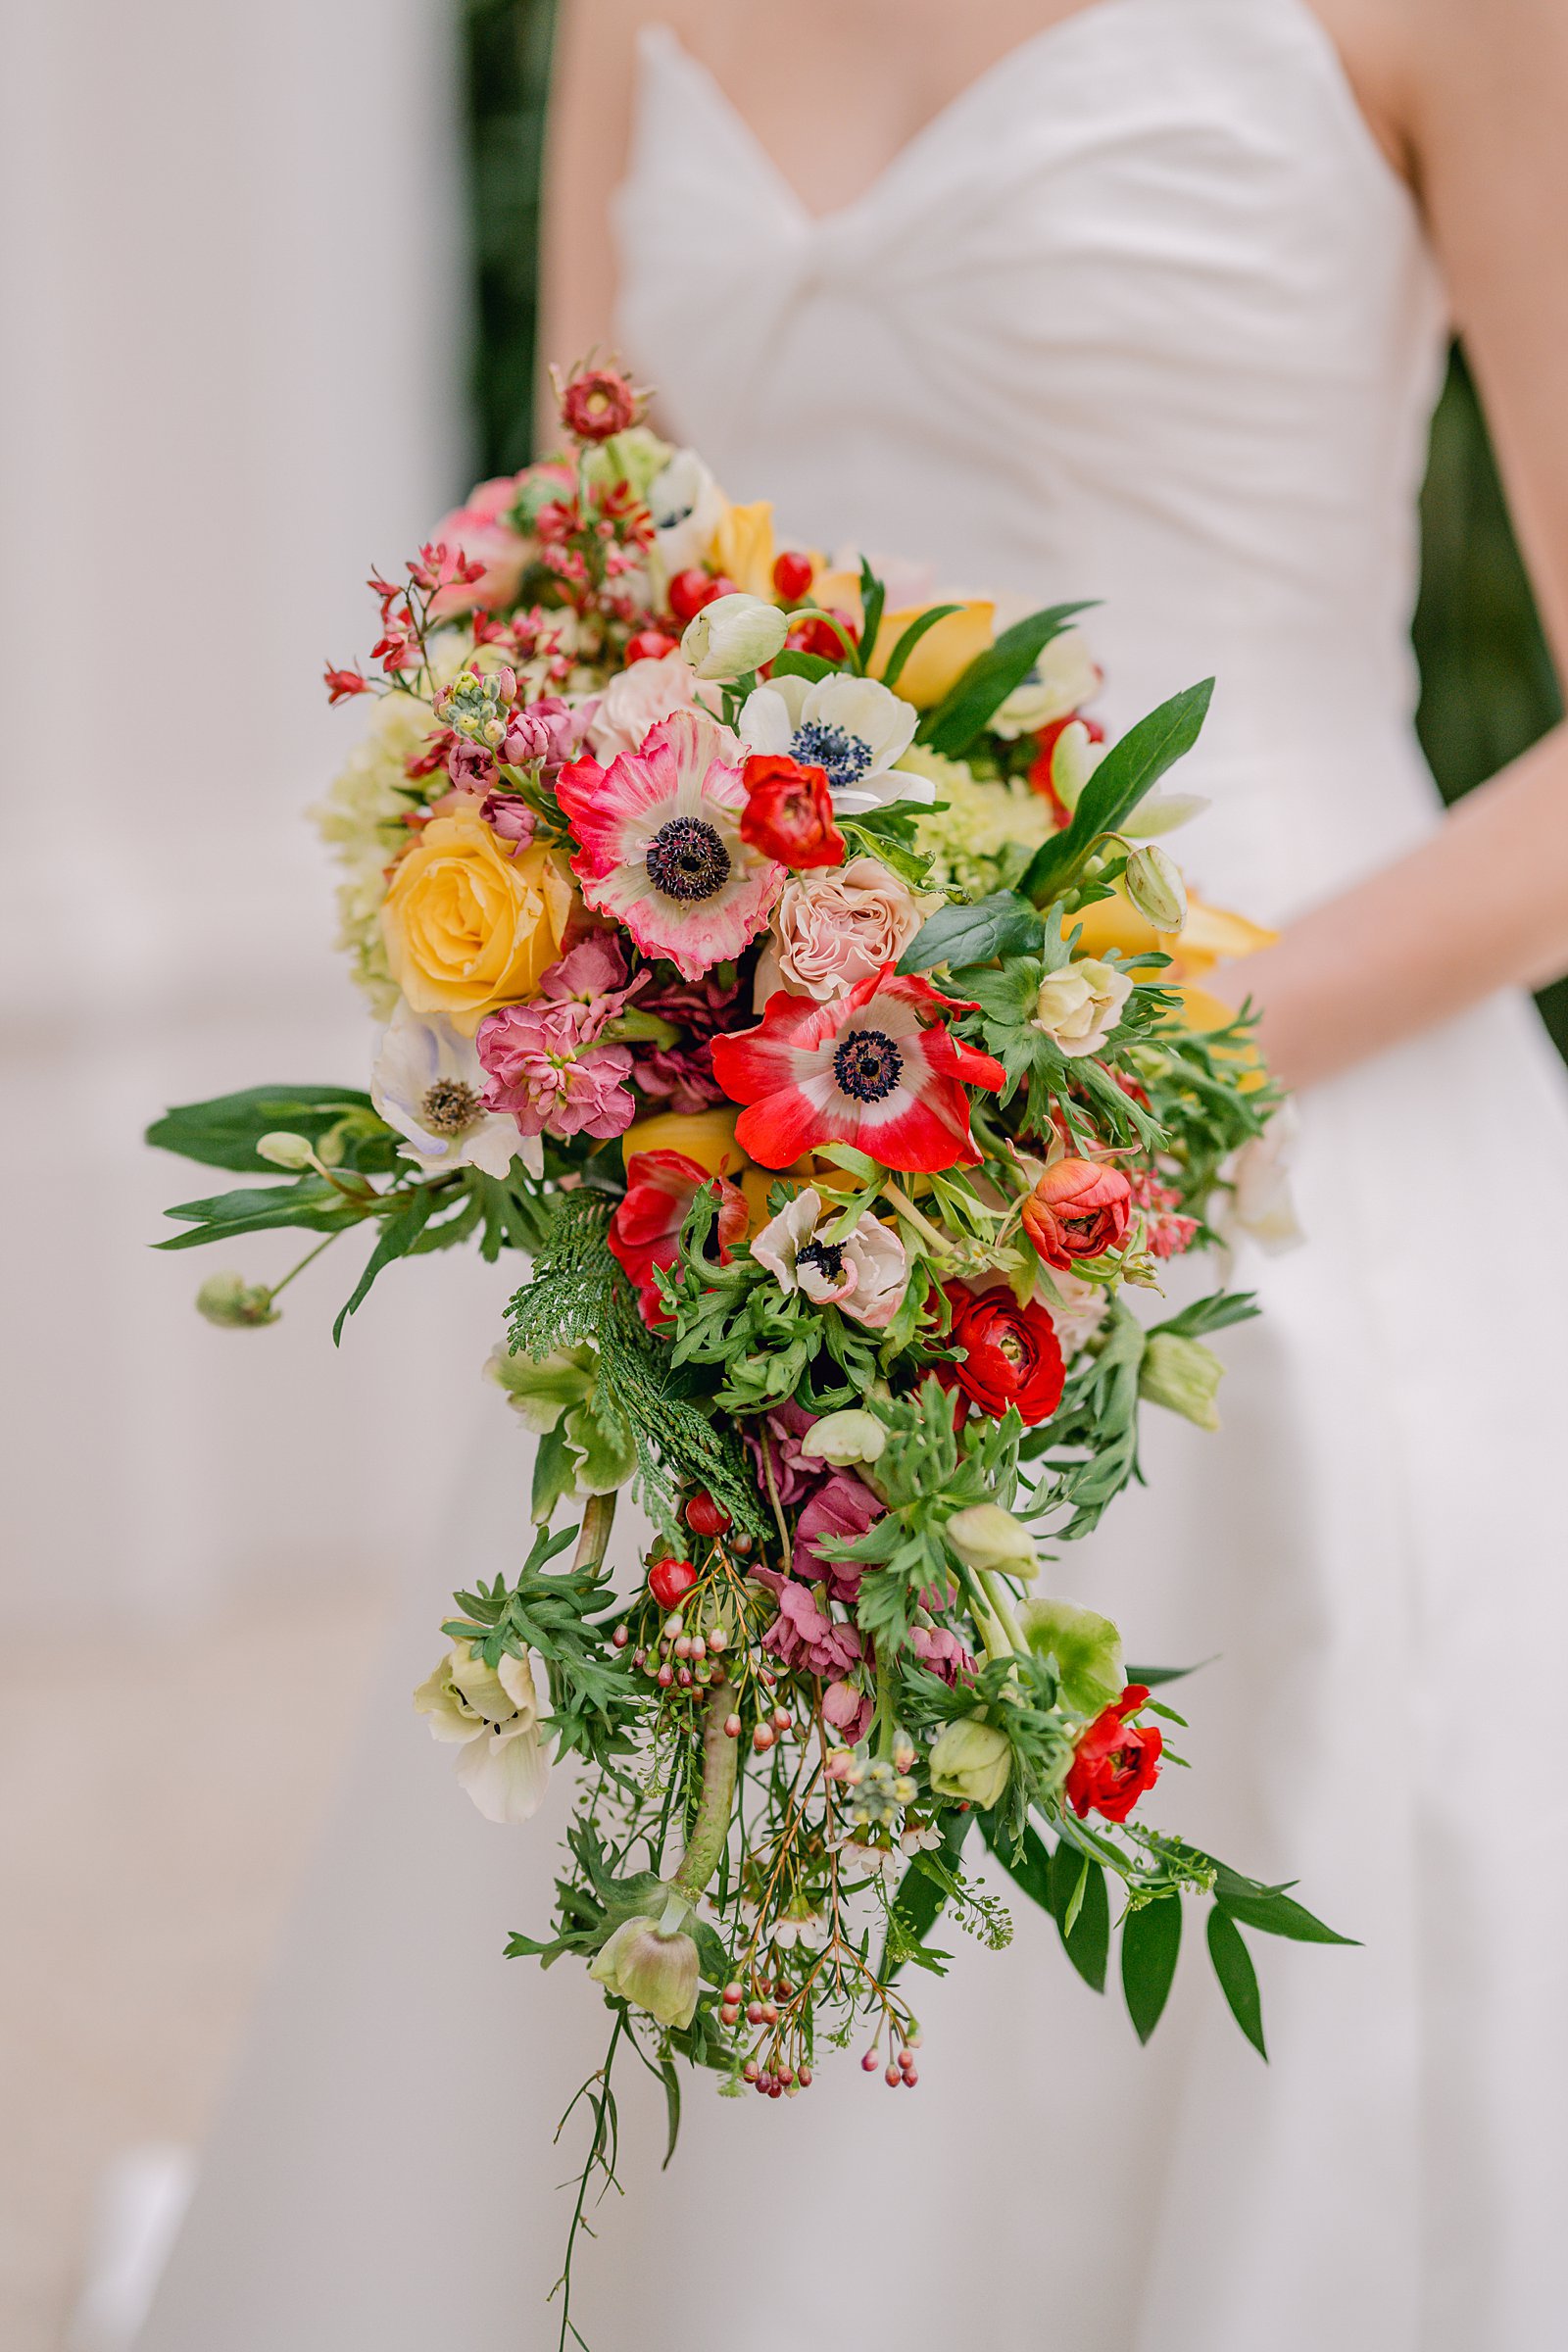 colorful winter wedding in columbus, ga  colorful winter bouquet with poppies, roses, and berries 